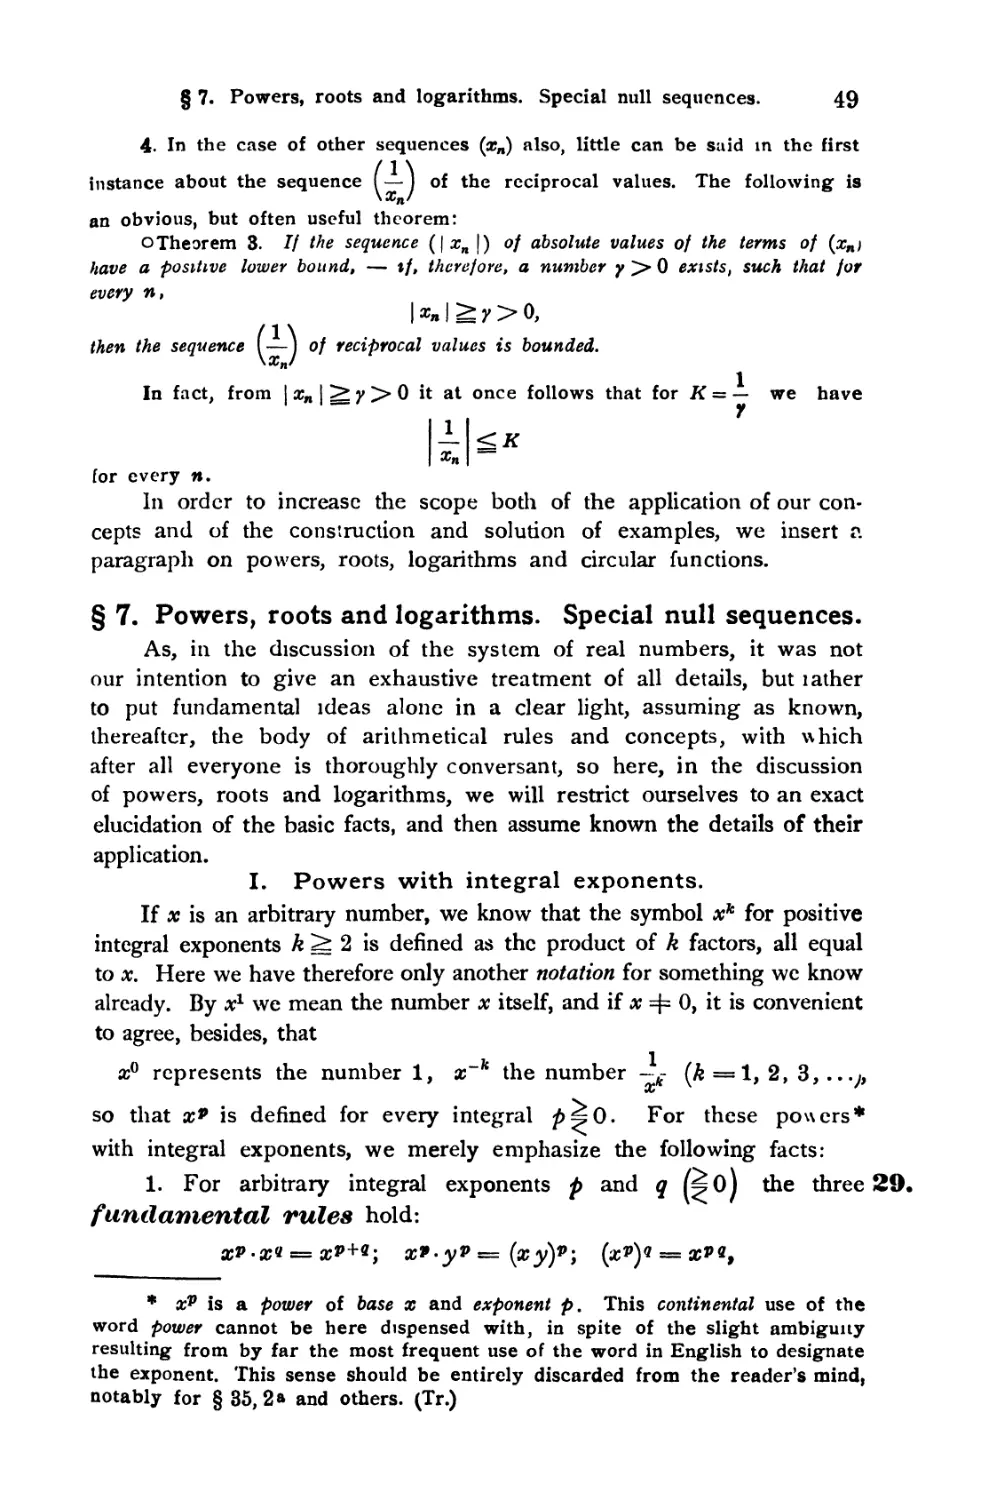 § 7. Powers, roots, and logarithms Special null sequences